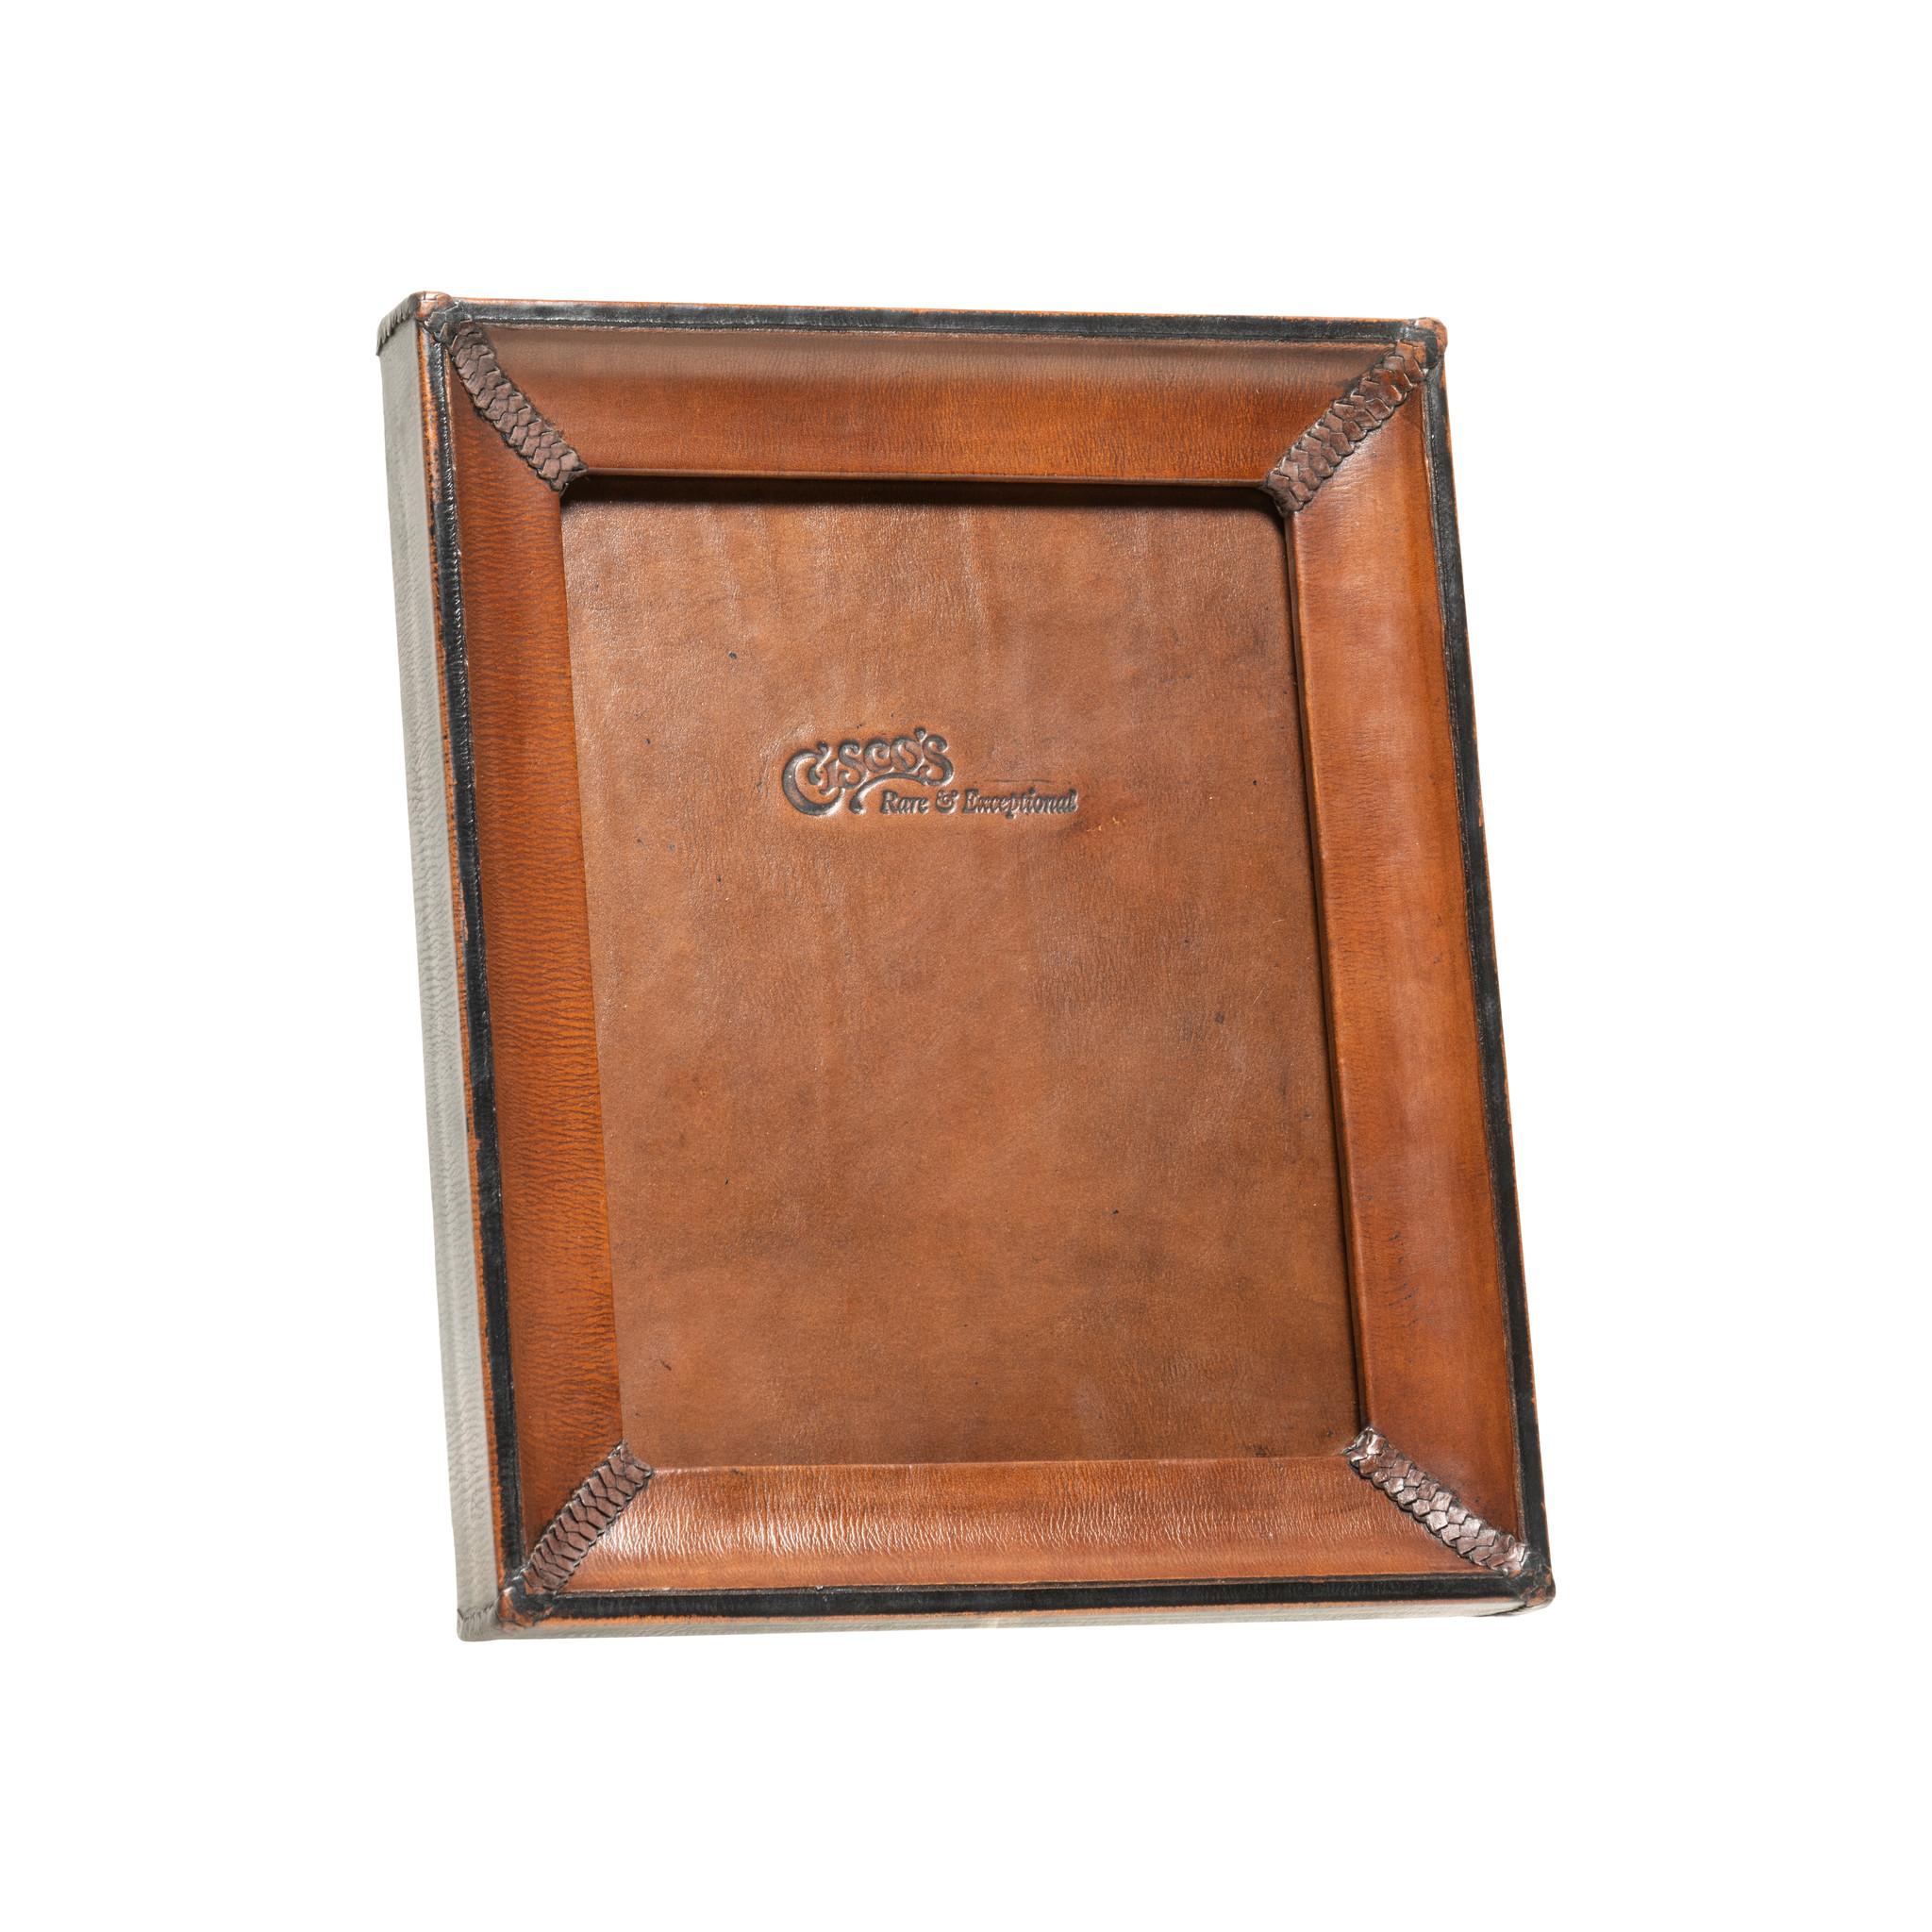 4x6 medium brown and black leather tabletop picture frame. Cisco's premium leather picture frames add the perfect accent to any home or office. Each frame is skillfully crafted by artisan saddle makers using genuine cowhide. Color: Dark brown with